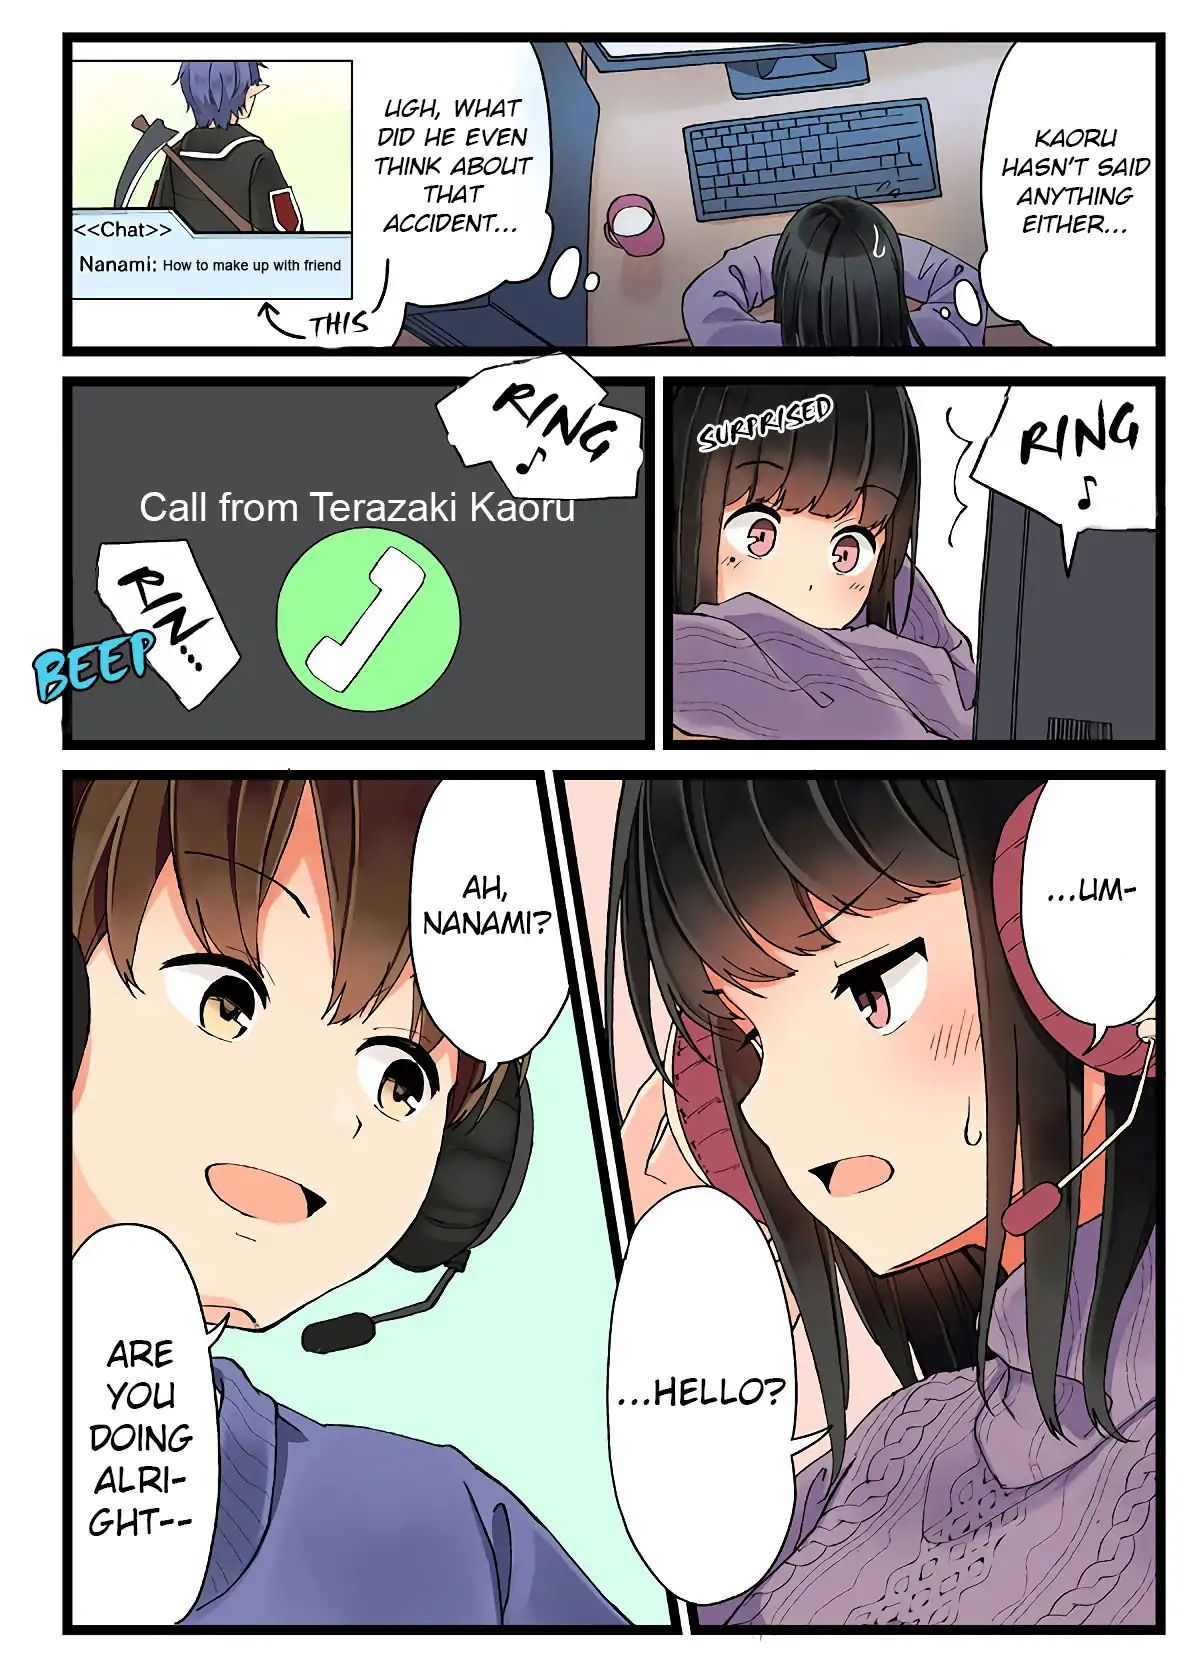 Hanging Out With A Gamer Girl - Page 2